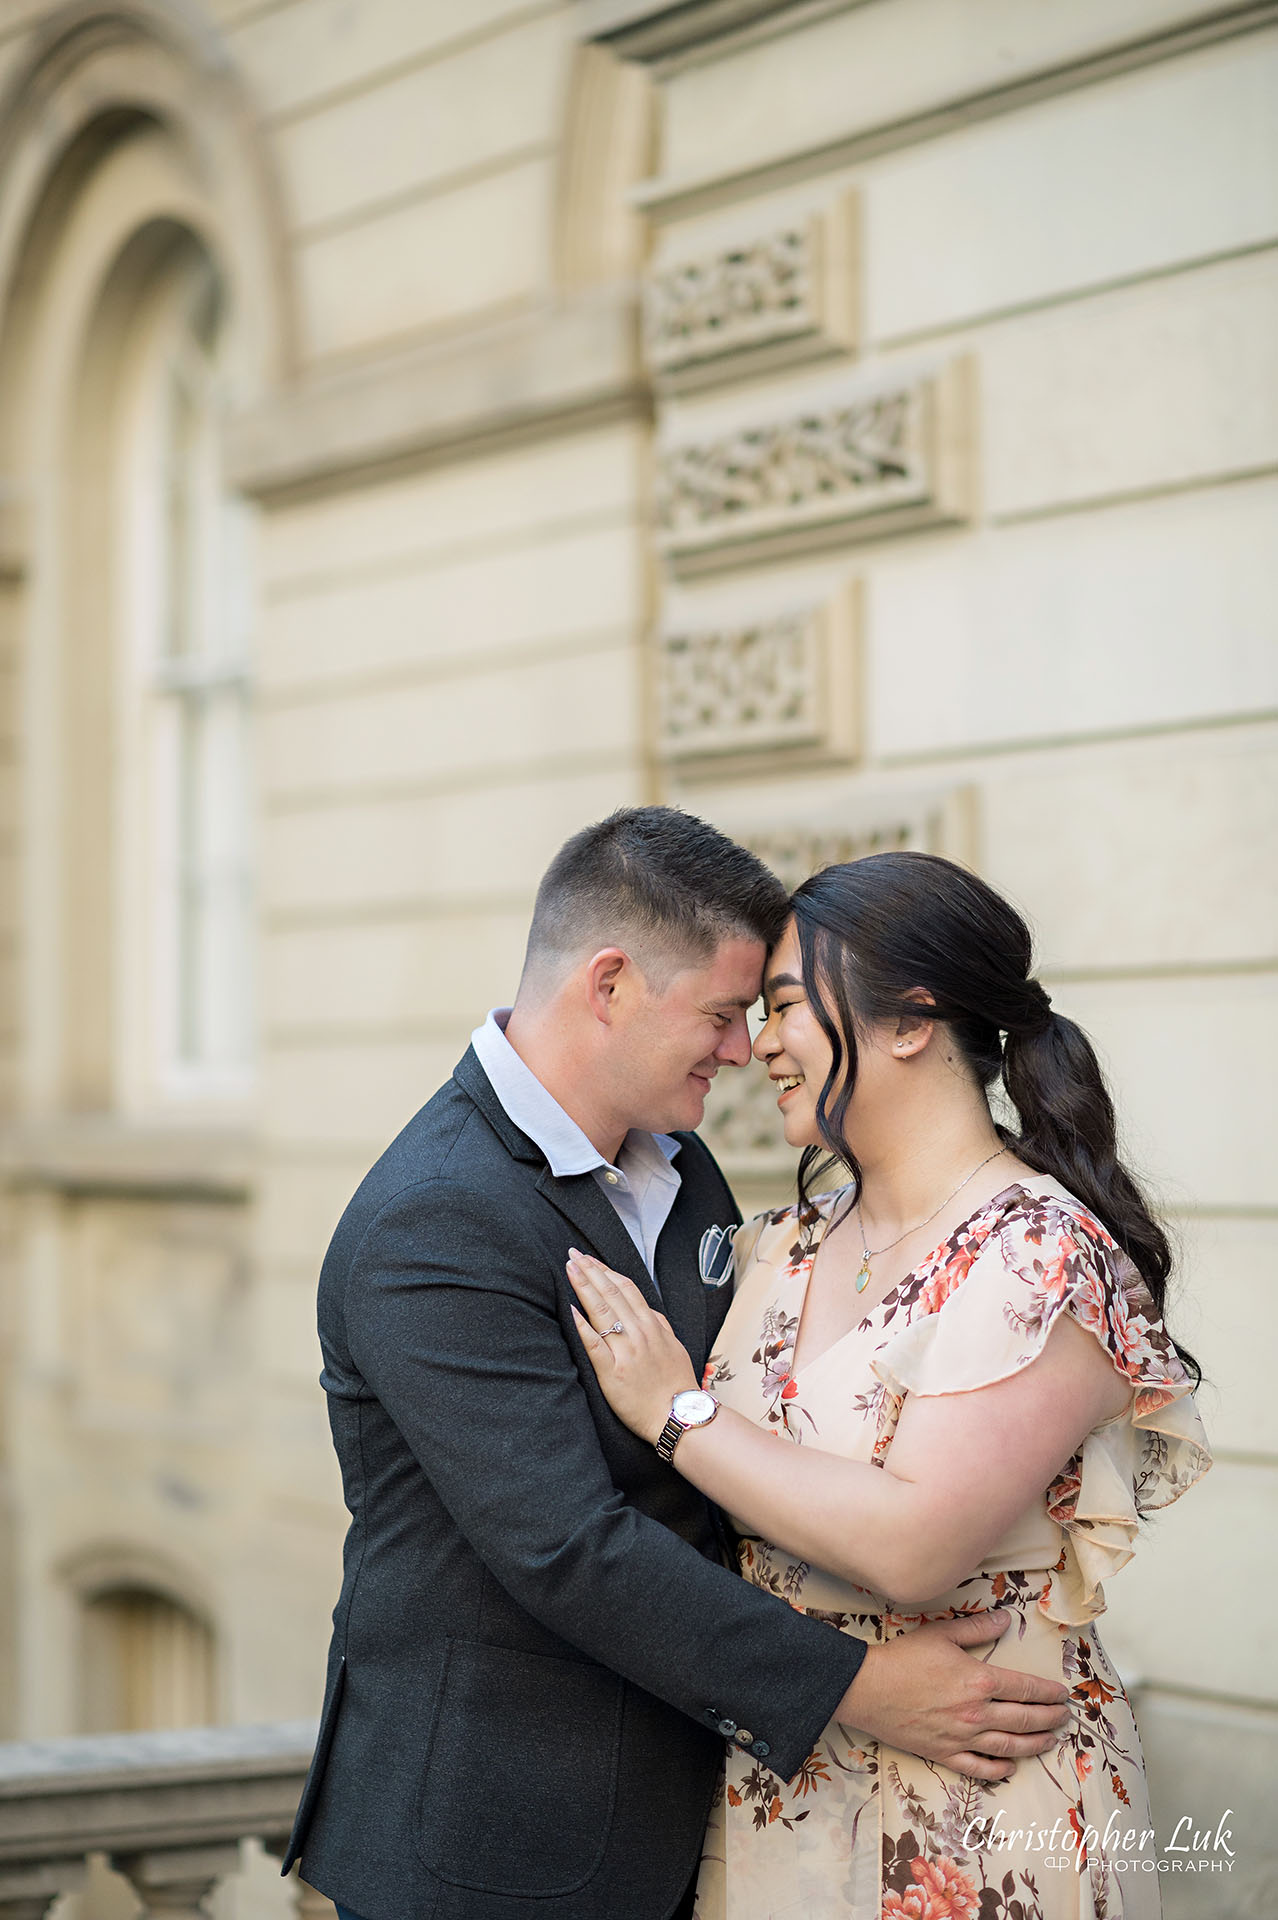 Christopher Luk Toronto Wedding Photographer Engagement Photos Pictures Session Osgoode Hall Nathan Philips Square City Hall Bride Groom Natural Candid Photojournalistic Organic Sunset Hug Hold Each Other Intimate Portrait